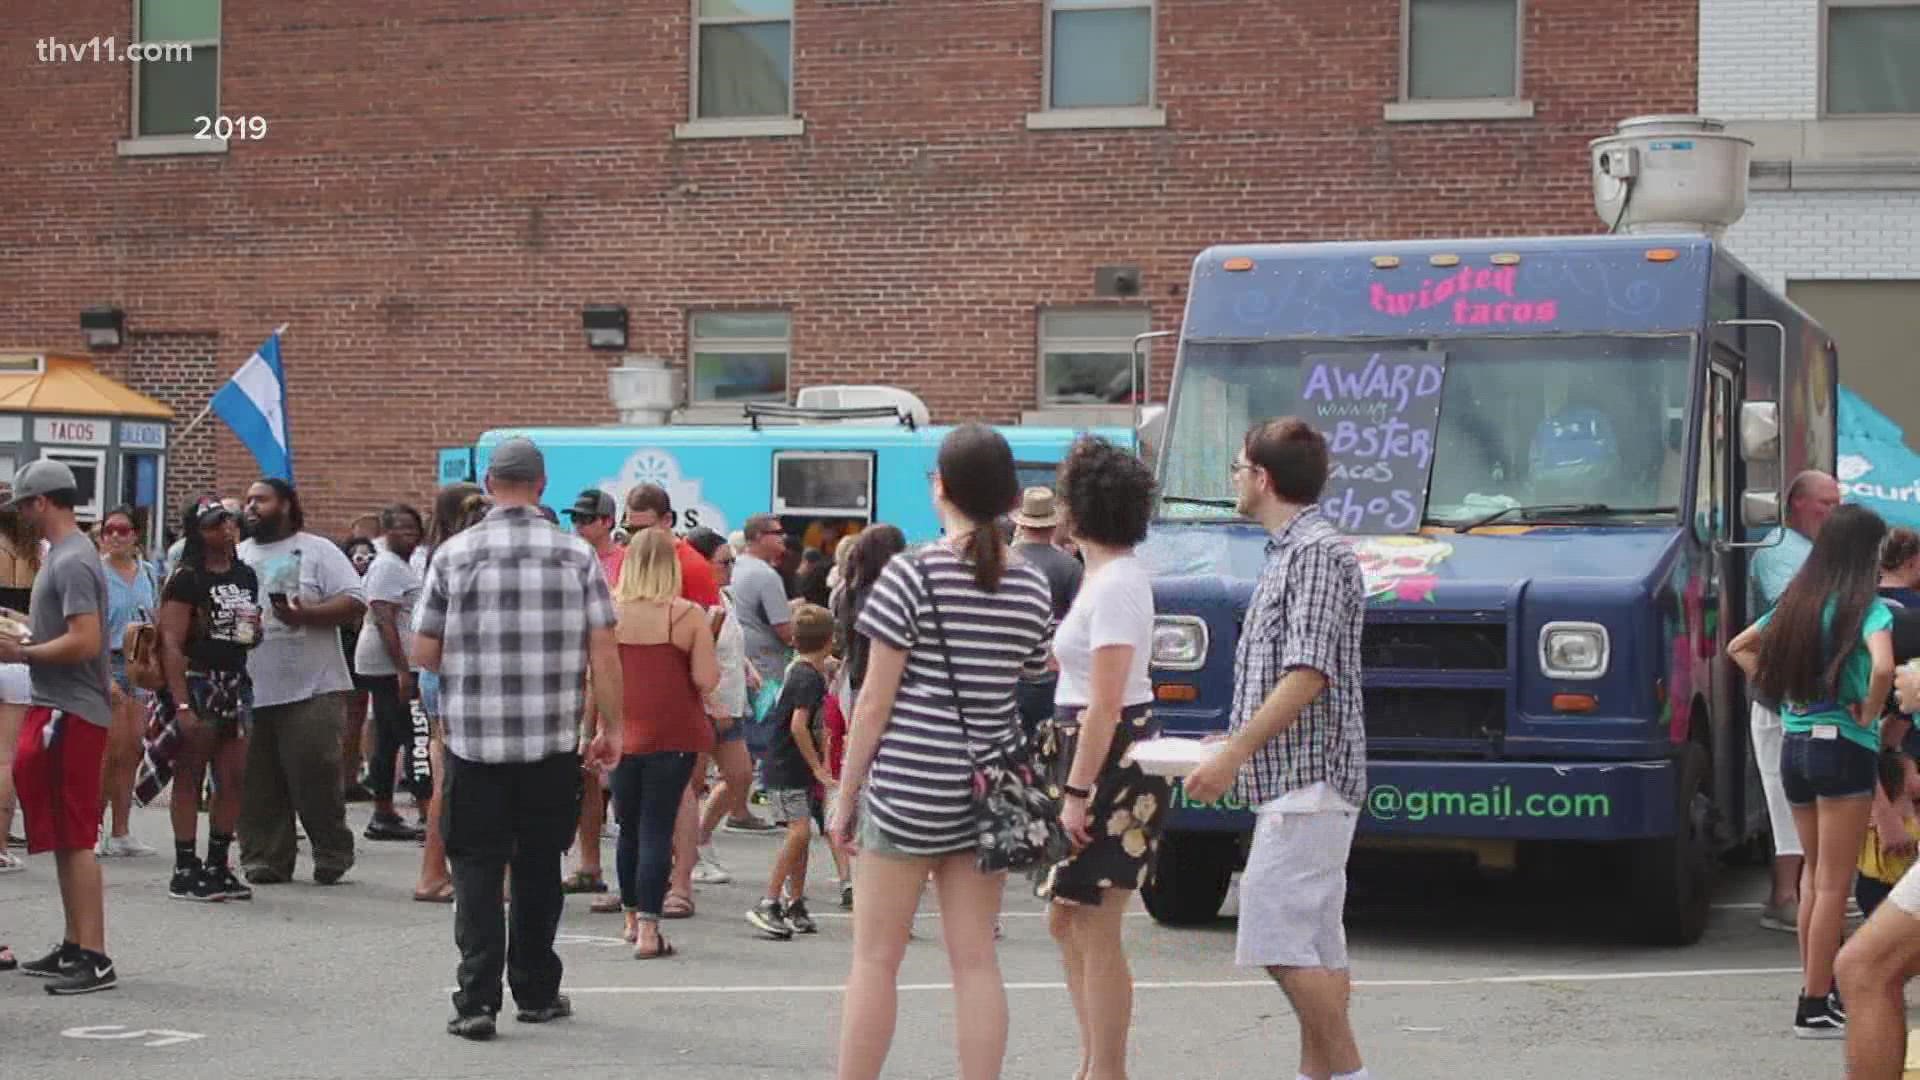 The 11th Annual Main Street Food Truck Festival is this Sunday and will have over 60 food trucks from all over the state.